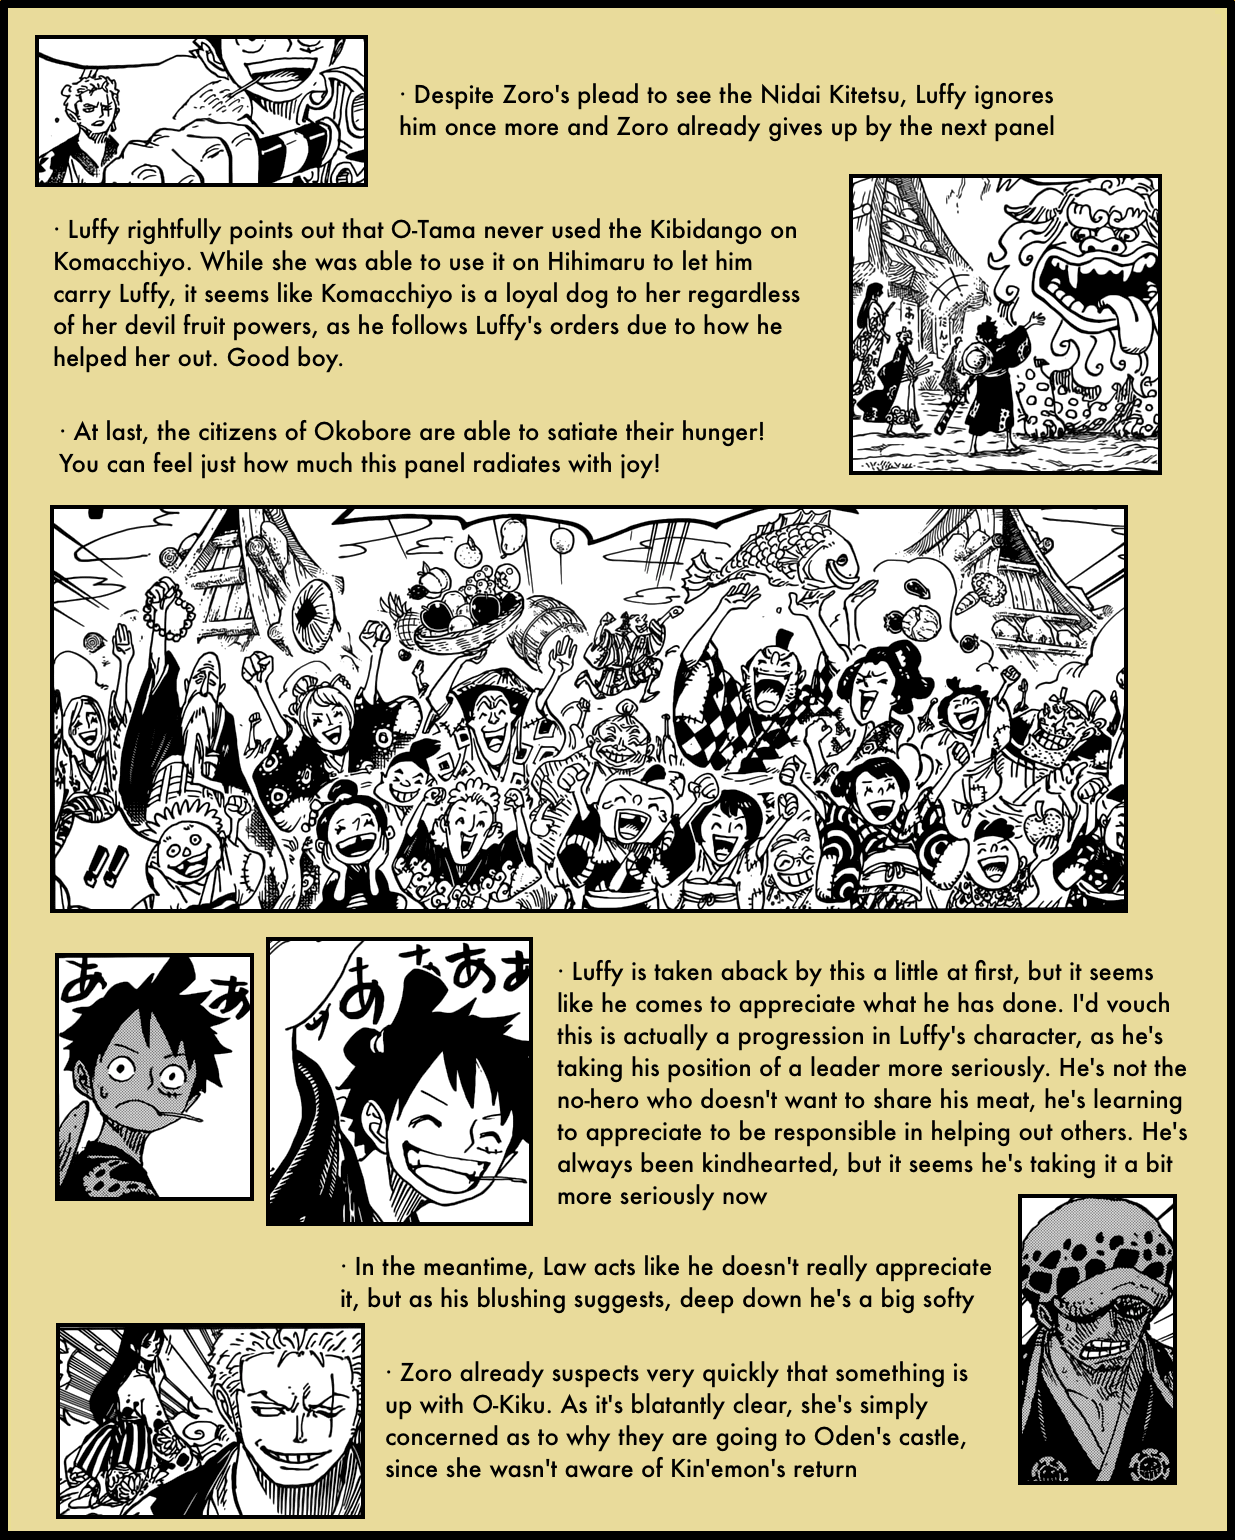 One Piece Chapter 1037 and its five biggest takeaways